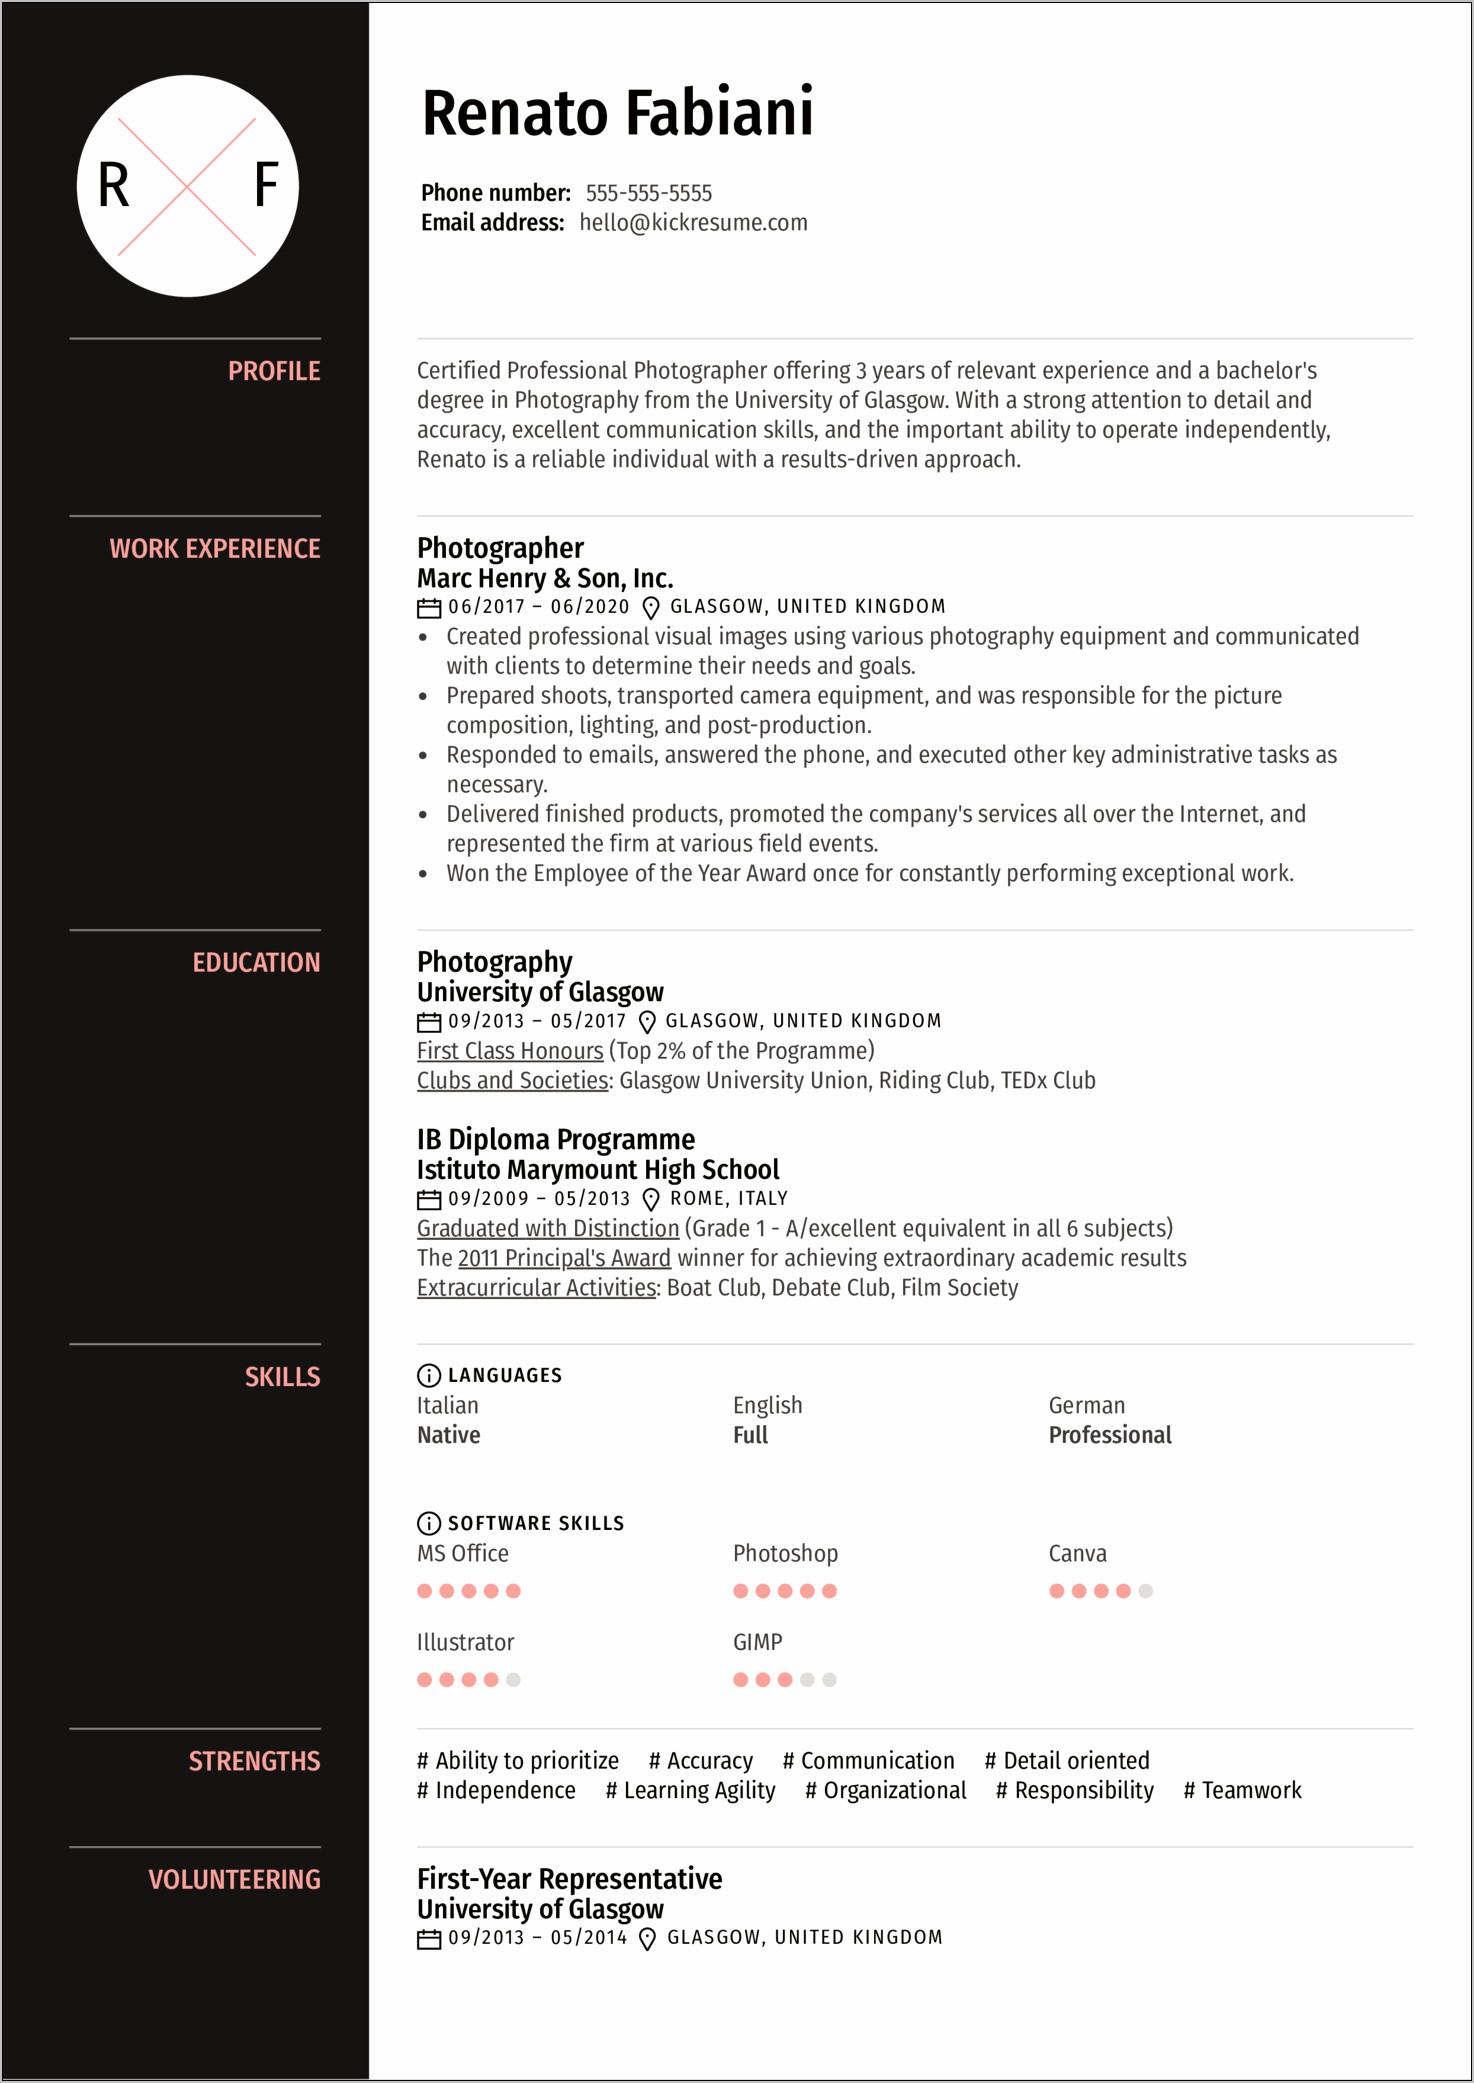 Resume Sample For A Photographer